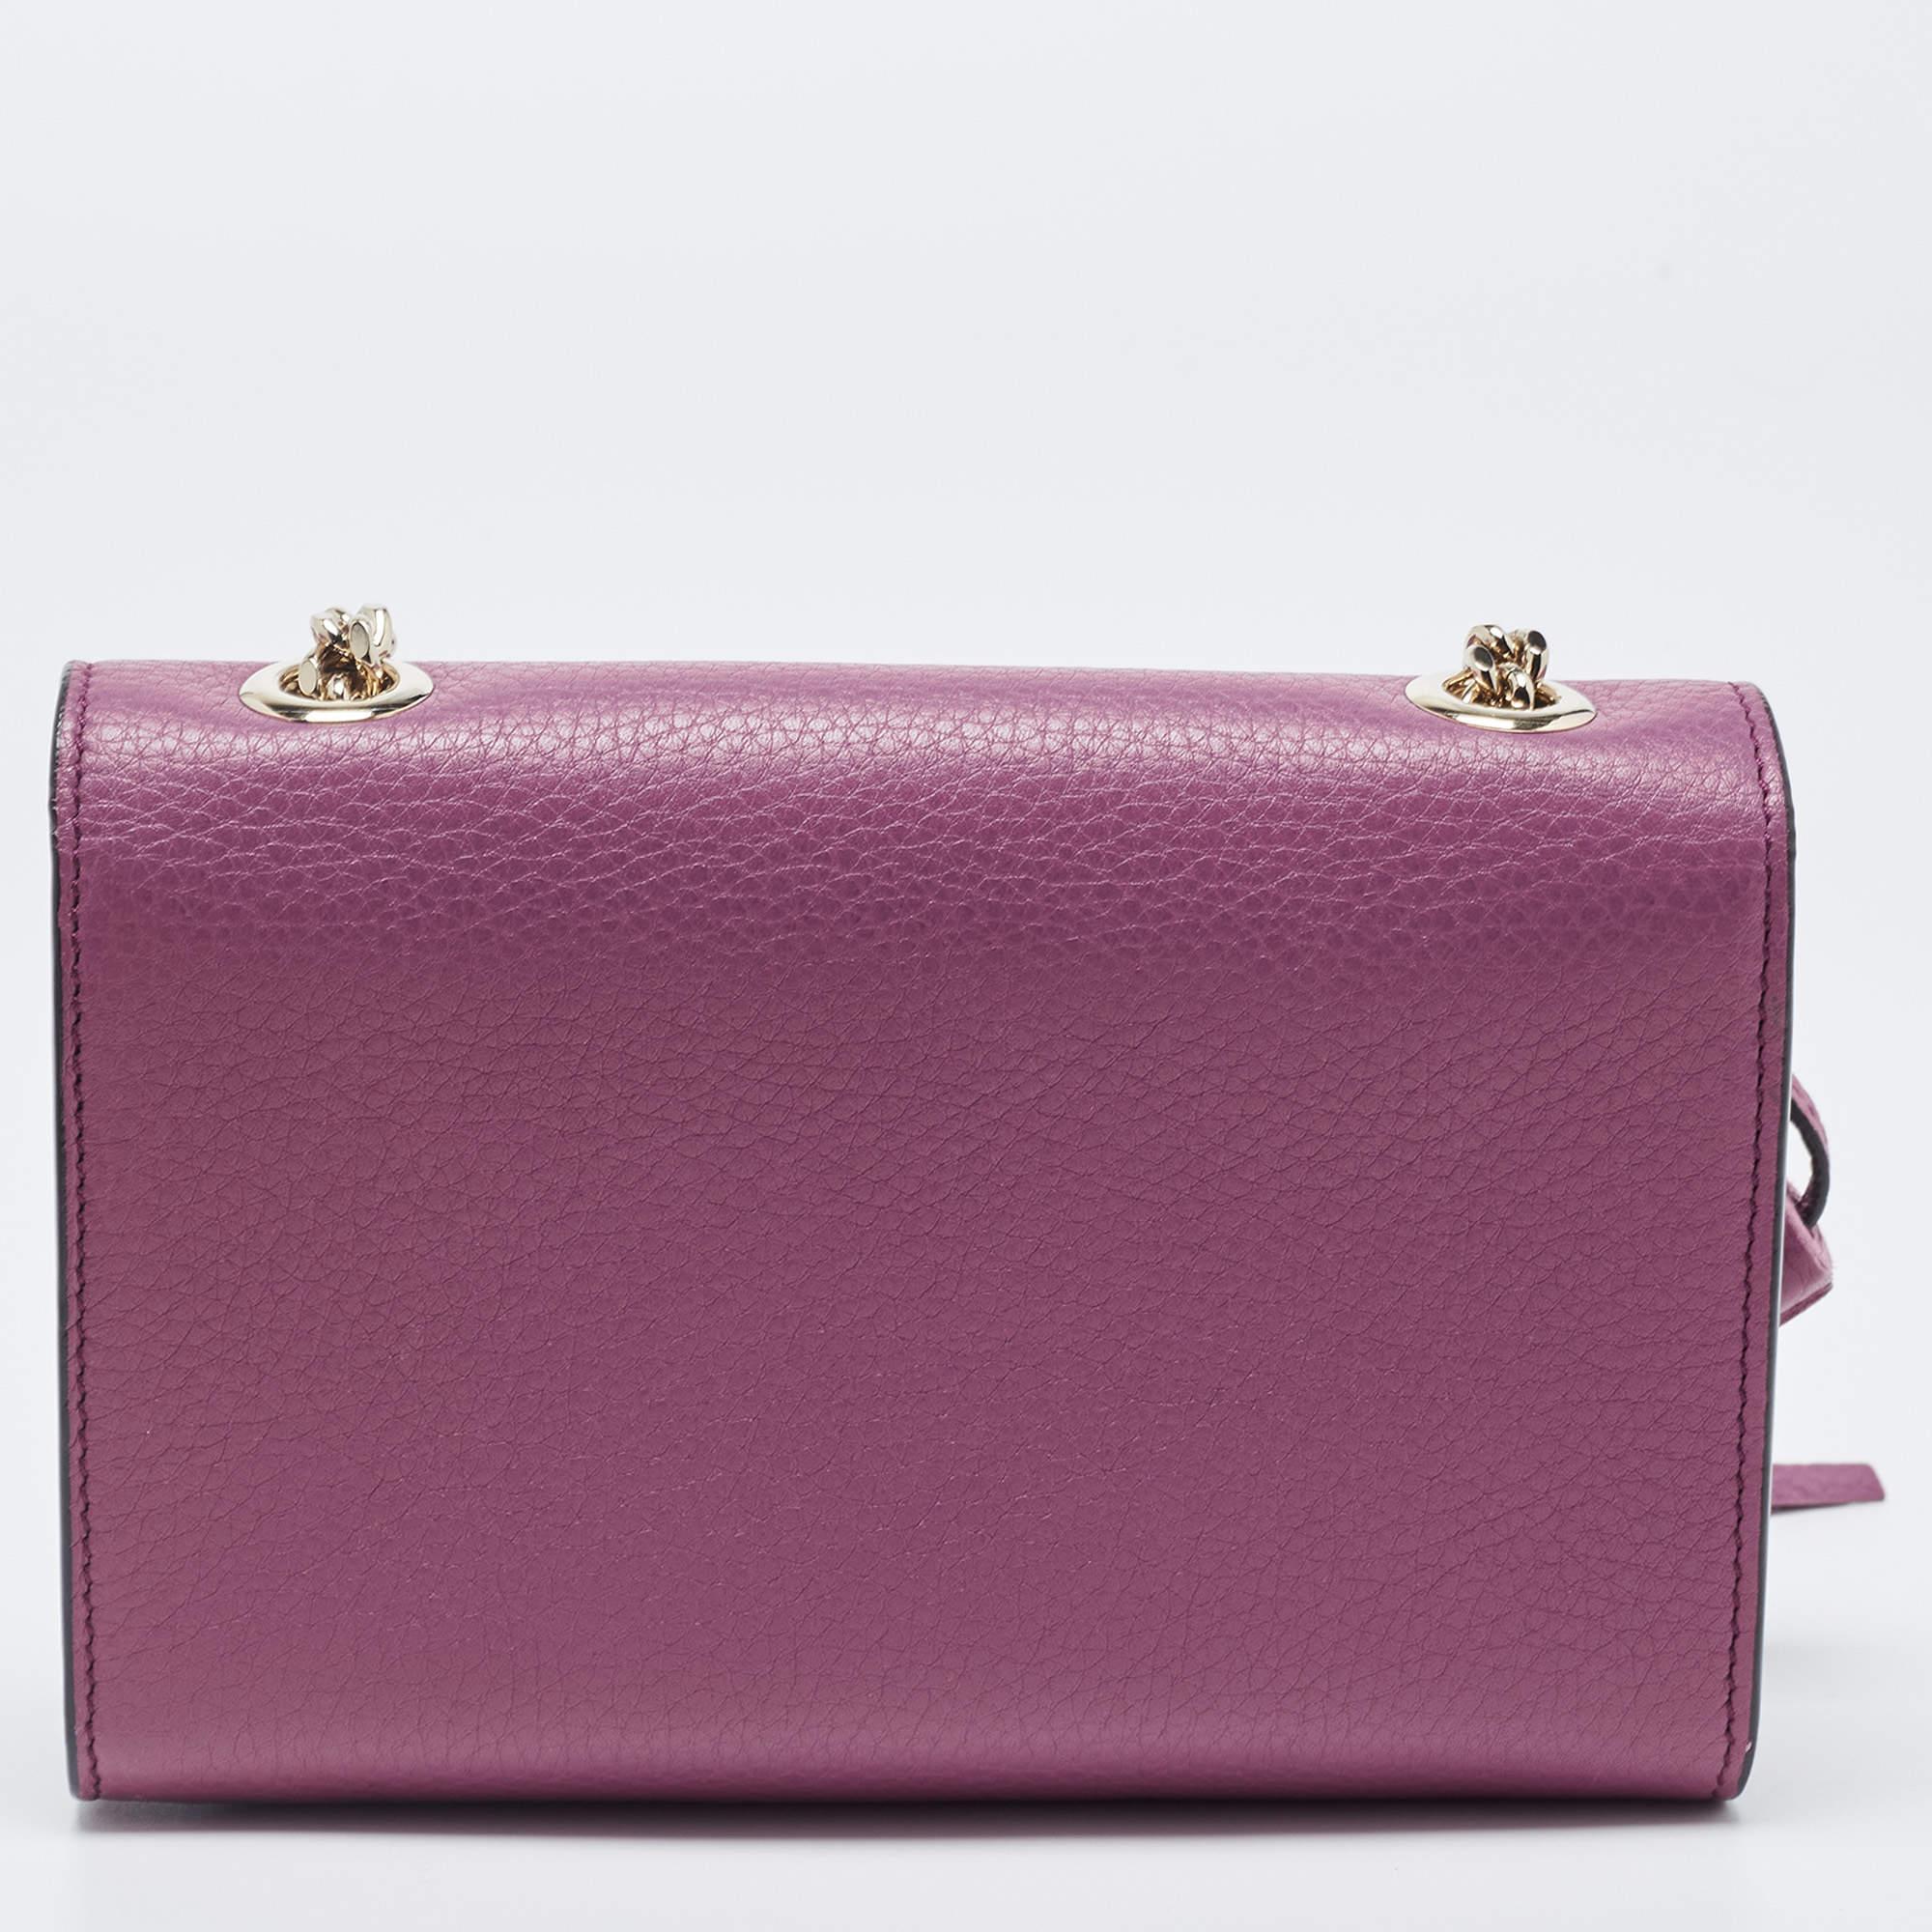 Gucci Magenta Leather Miss Bamboo Tassel Chain Bag 8